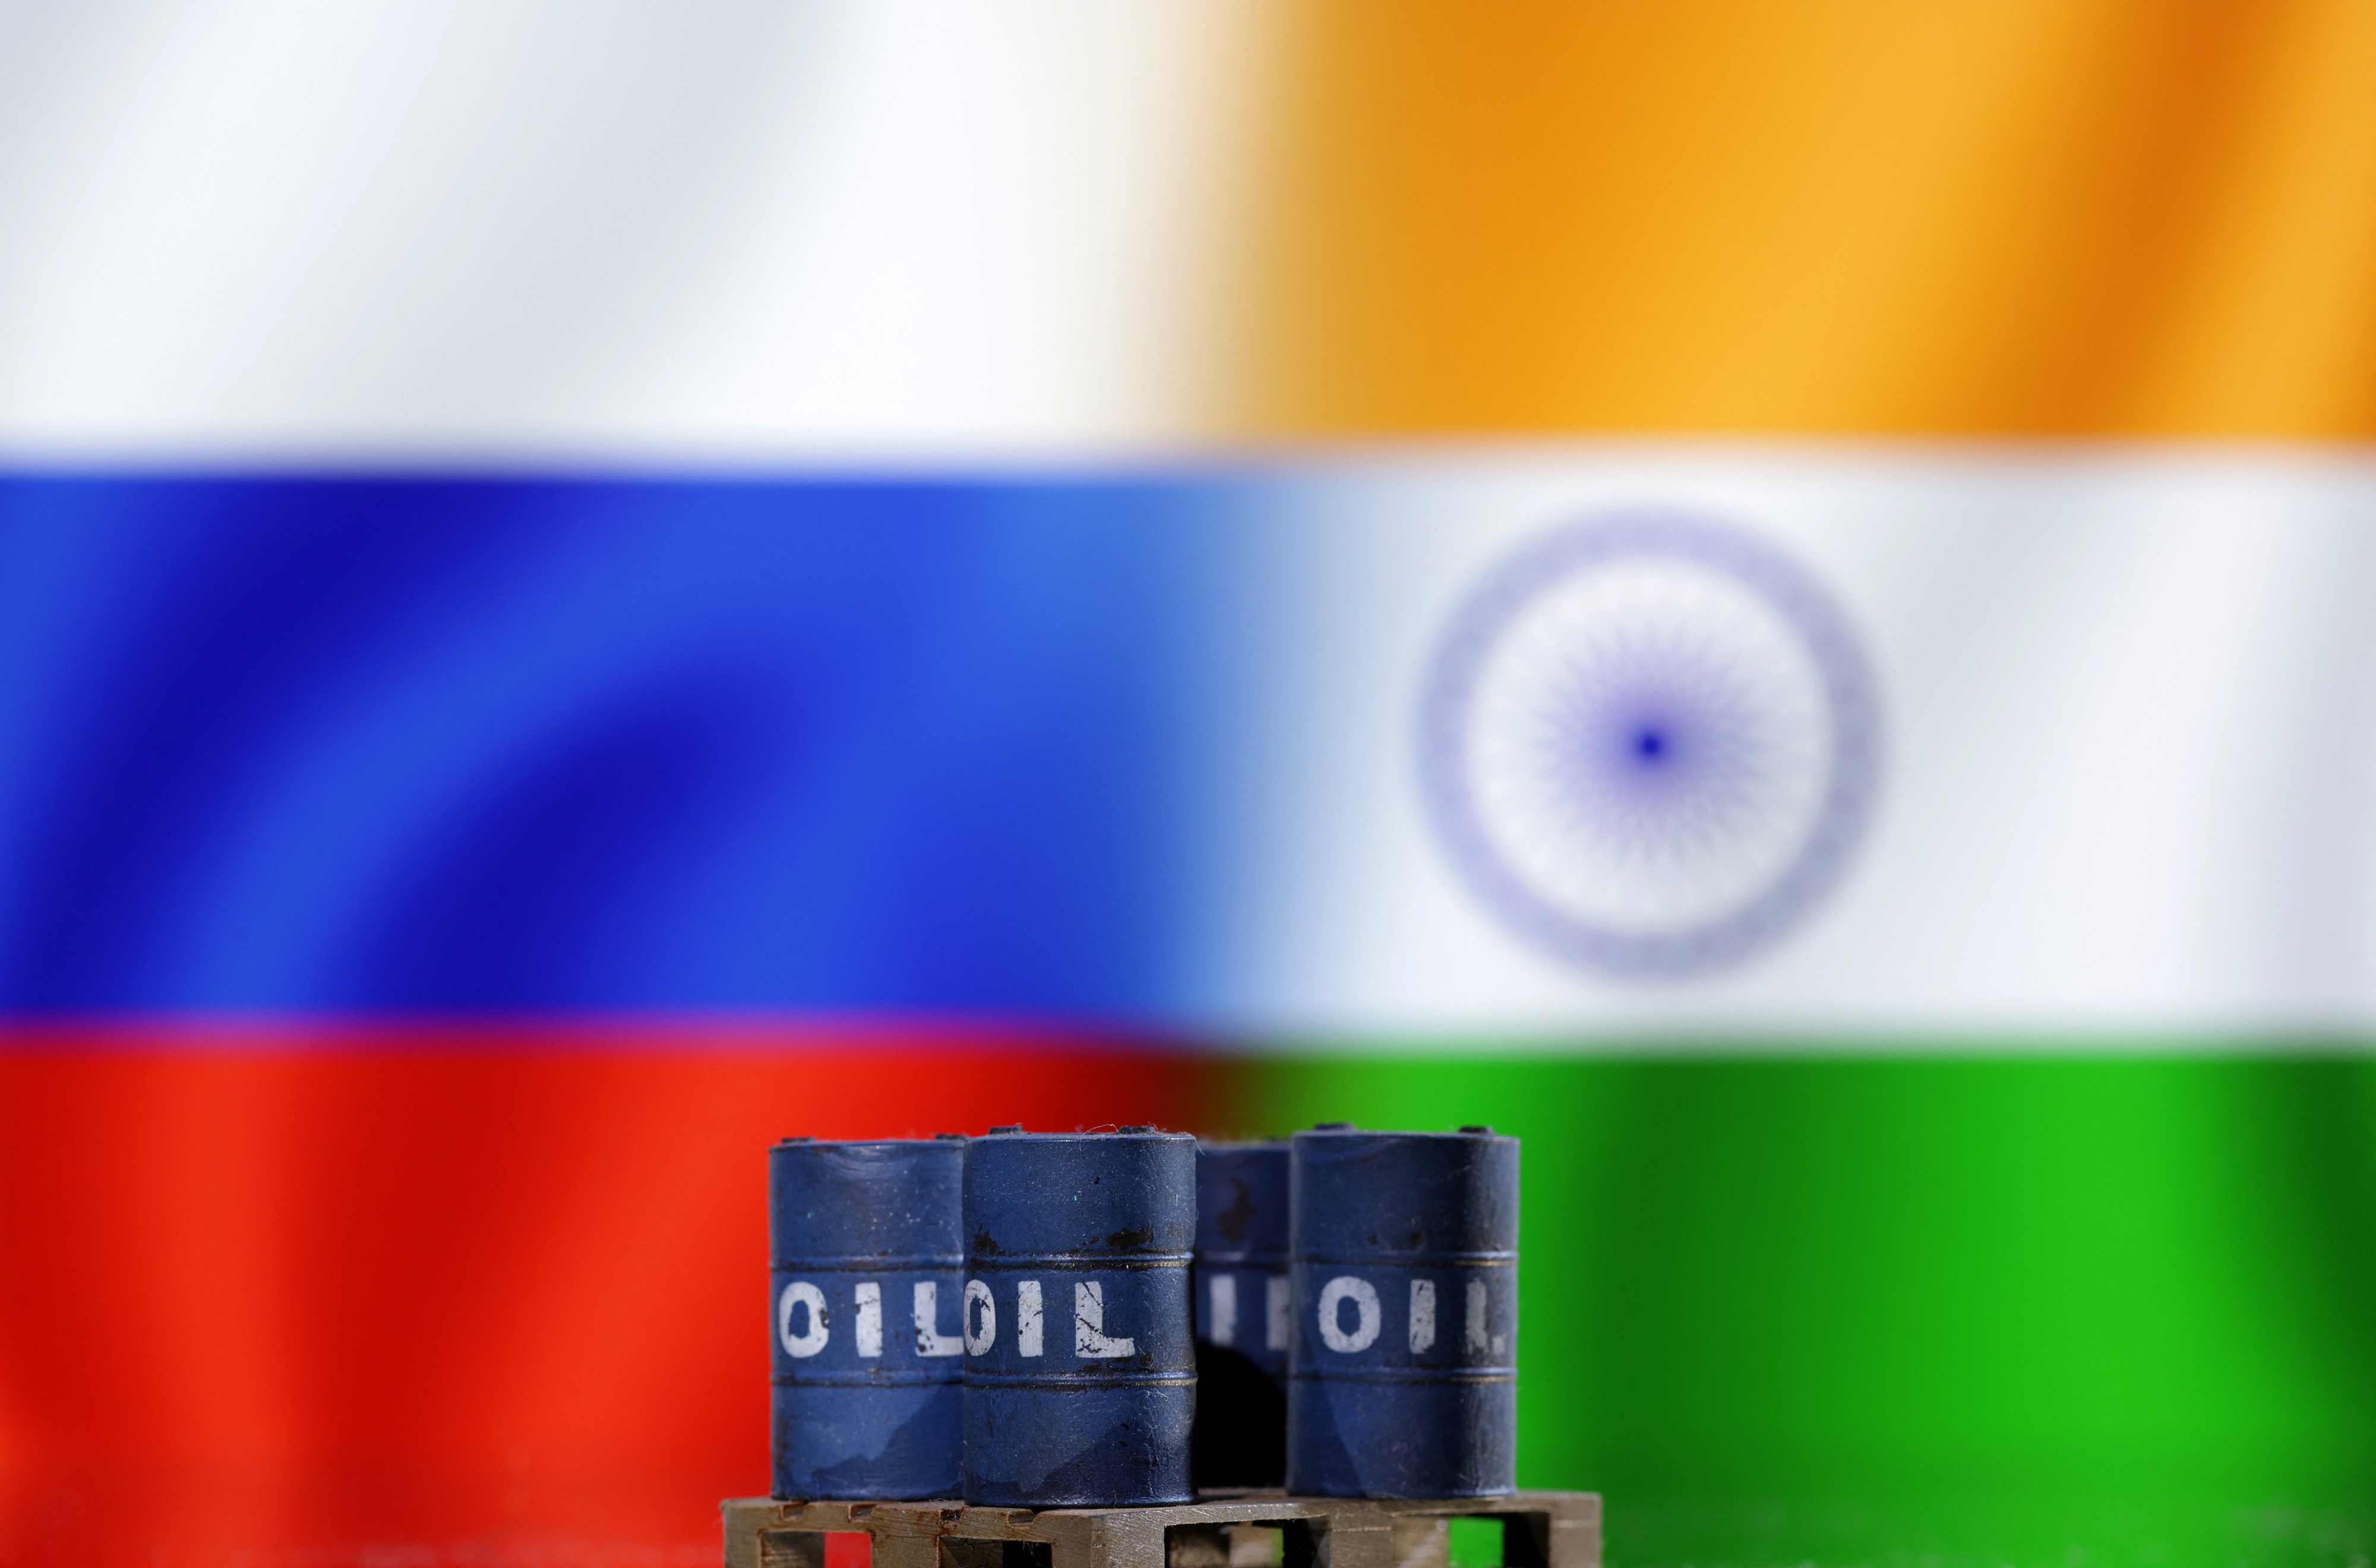 Illustration shows oil pump jack, Russian and Indian flags